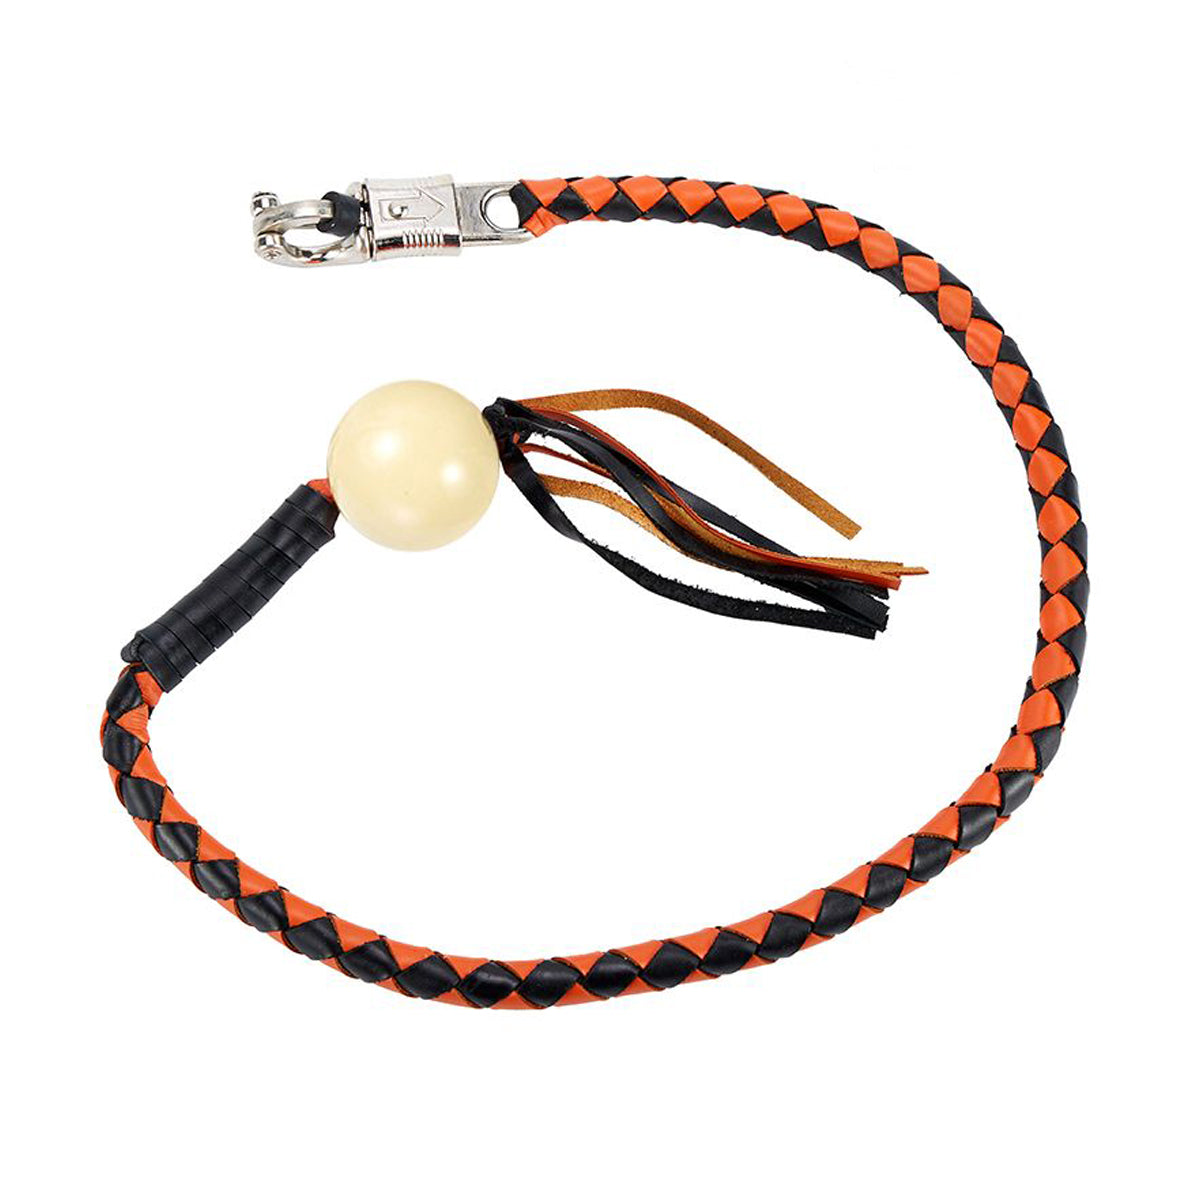 Black And Orange Fringed Get Back Whip With White Pool Ball